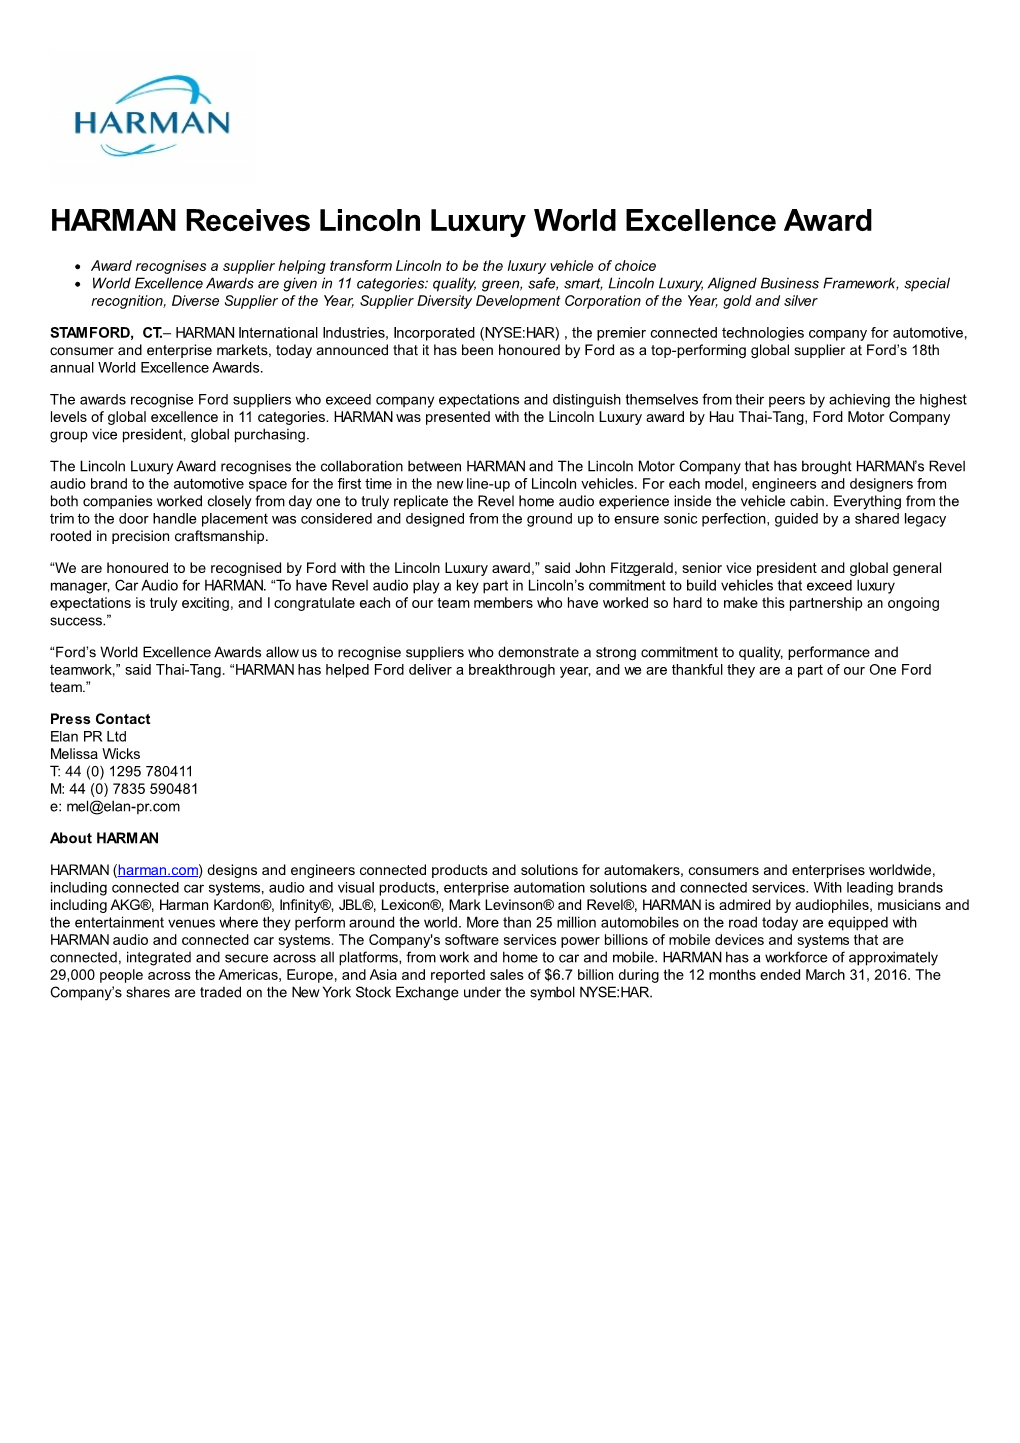 HARMAN Receives Lincoln Luxury World Excellence Award